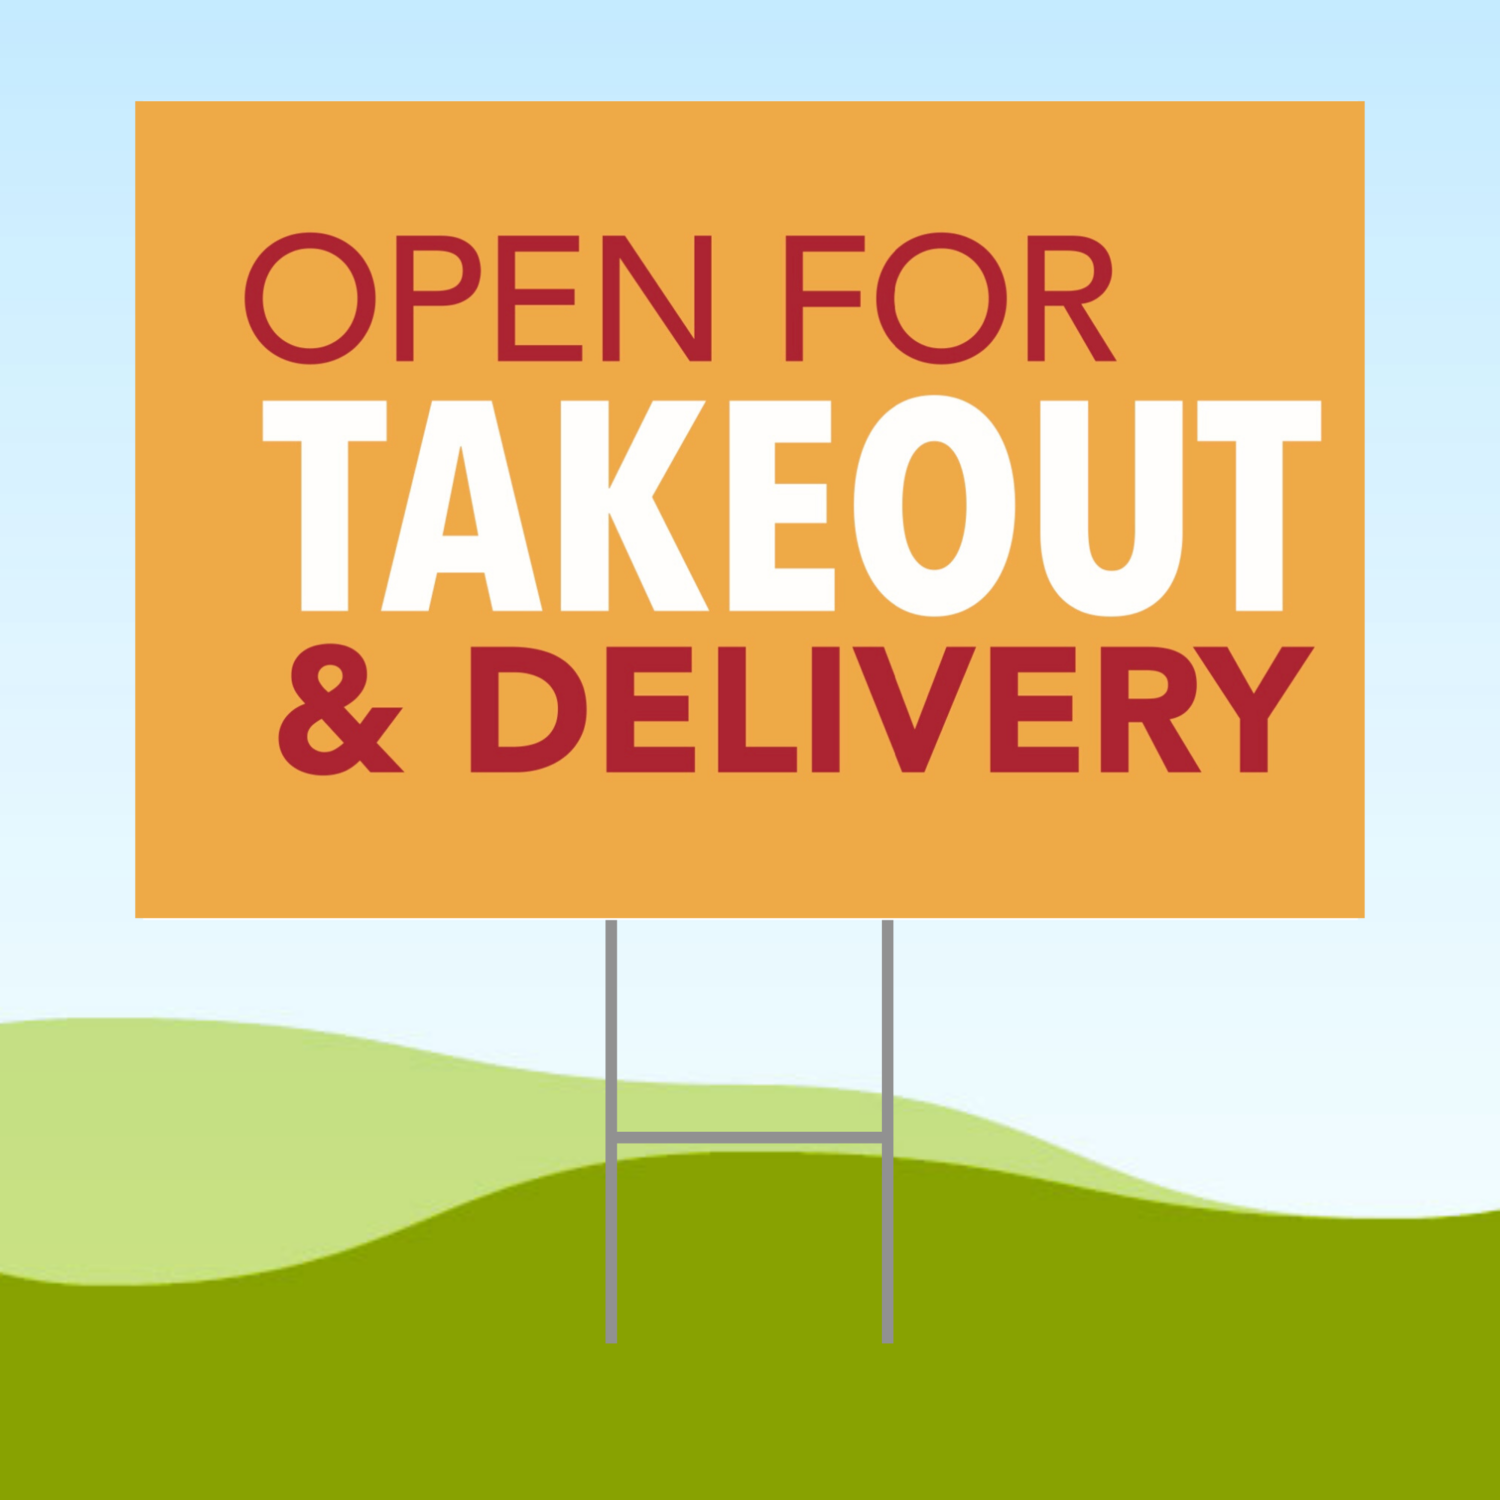 Open For Takeout & Delivery ORANGE 18x24 Yard Sign WITH STAKE Corrugated Plastic Bandit